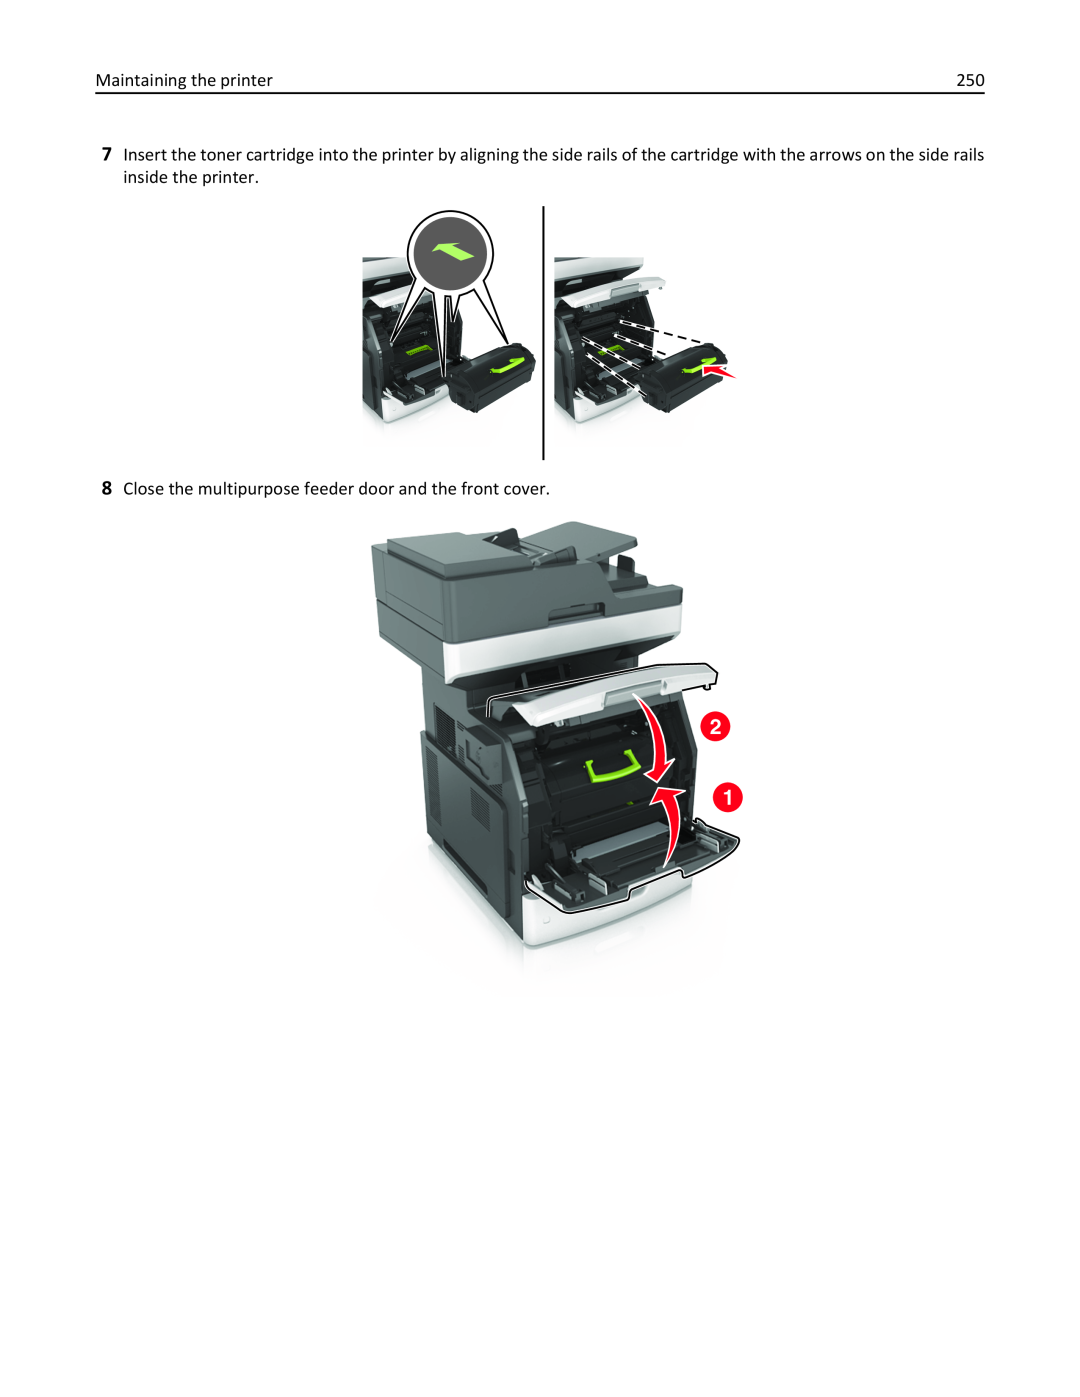 Lexmark MX710DHE, 24T7310, 237, 037 manual Maintaining the printer, Close the multipurpose feeder door and the front cover 